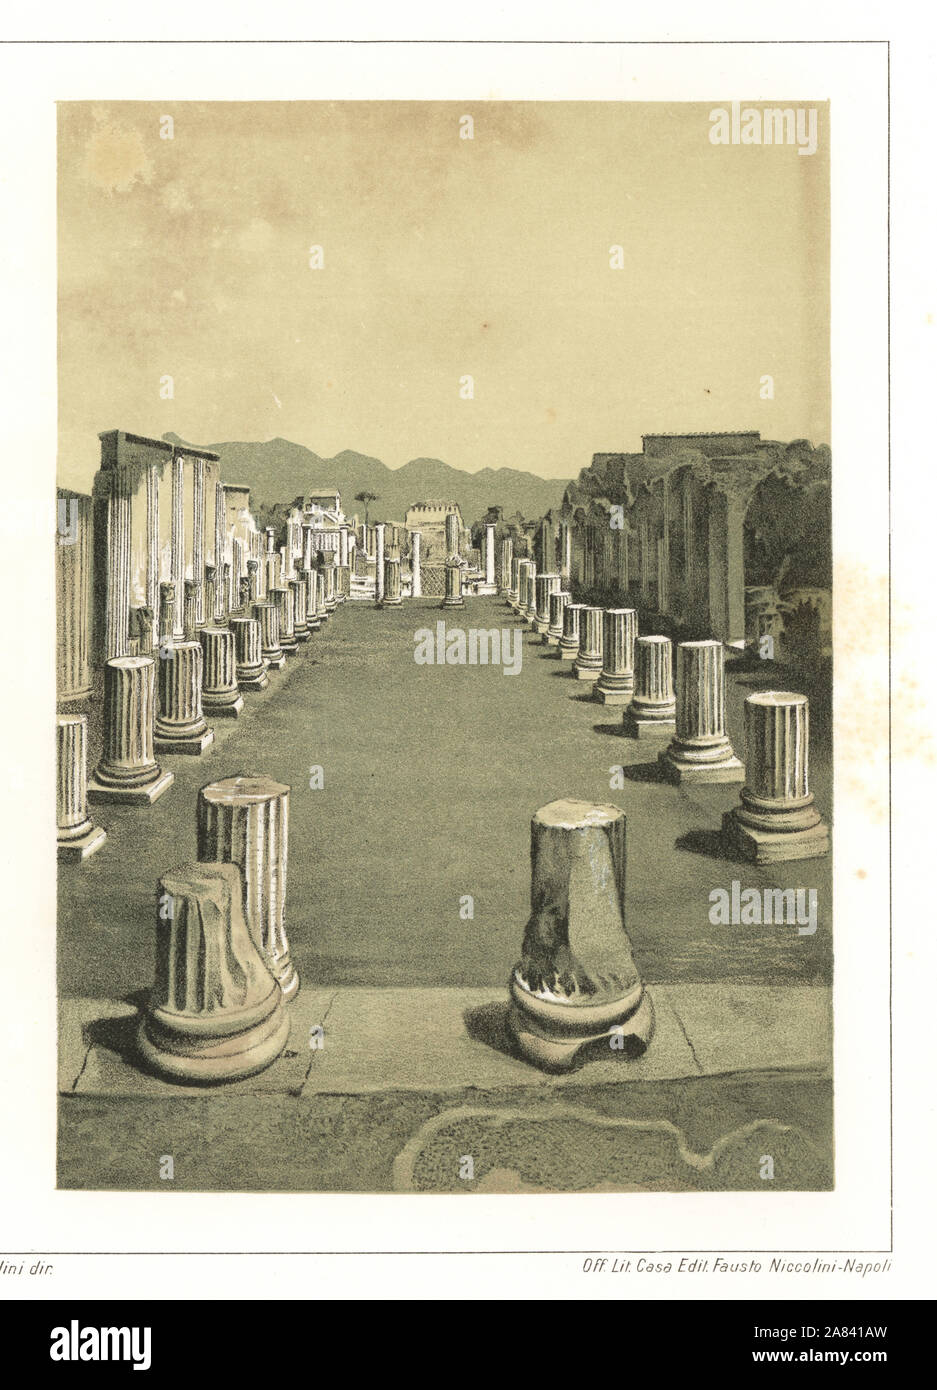 View of the Basilica, near the west corner of the Forum, Pompeii. Chromolithograph and illustration by S. De Stefano from Antonio Niccolini’s Pompeii: Views and Restorations (Pompeii: Essaies et Restaurations), published by Fausto Niccolini, Naples, 1898. Antonio was grandson of the architect Antonio Niccolini Sr. Stock Photo